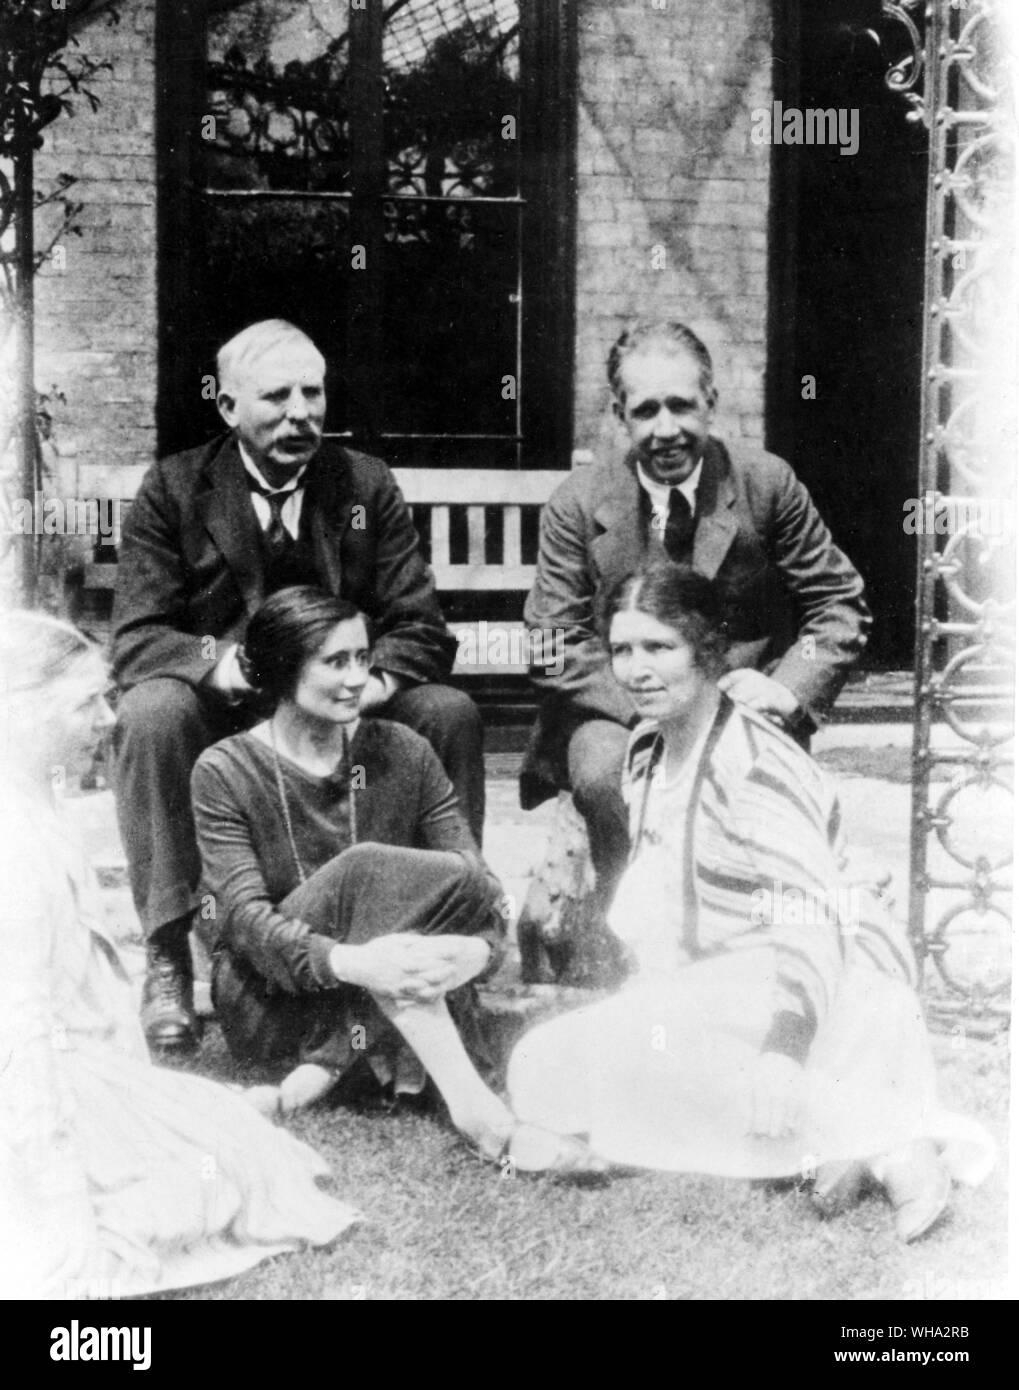 Lord Ernest Rutherford (1871-1937) and Lady Rutherford, Niels Bohr and Mrs Bohr. Rutherford was an English physicist who investigated radioactivity and the structure of atoms. Stock Photo